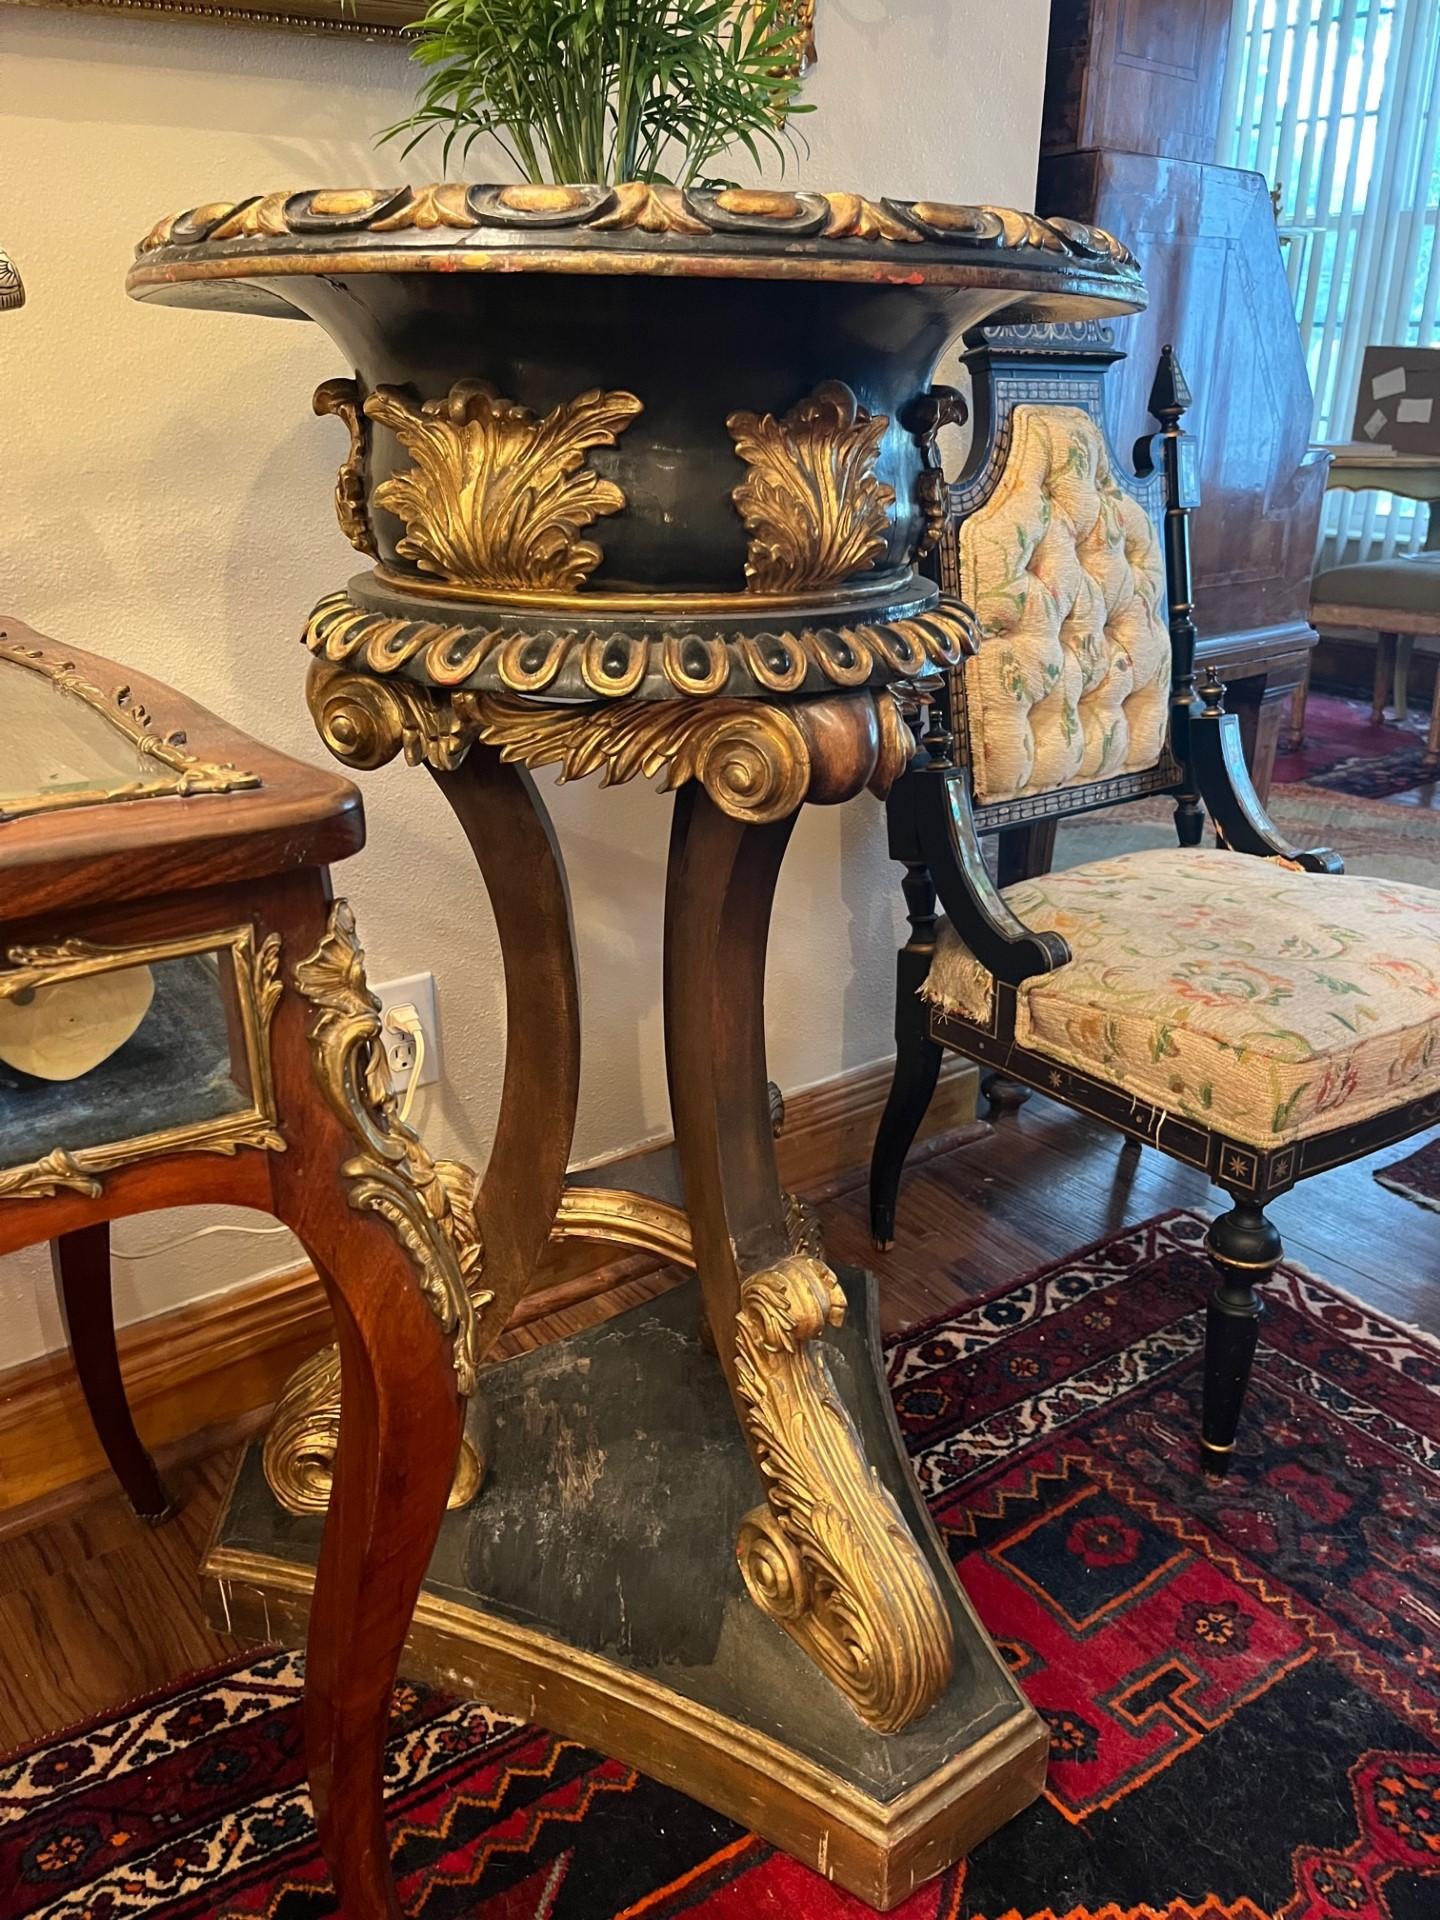 Scottish Regency Style Pair Ebonized Giltwood Palatial Jardinieres Sotheby’s Provenance.

Fabulous and incredibly elaborate Scottish Regency style hand carved pair of palatial jardinieres. These plant stands are handcrafted by highly talented